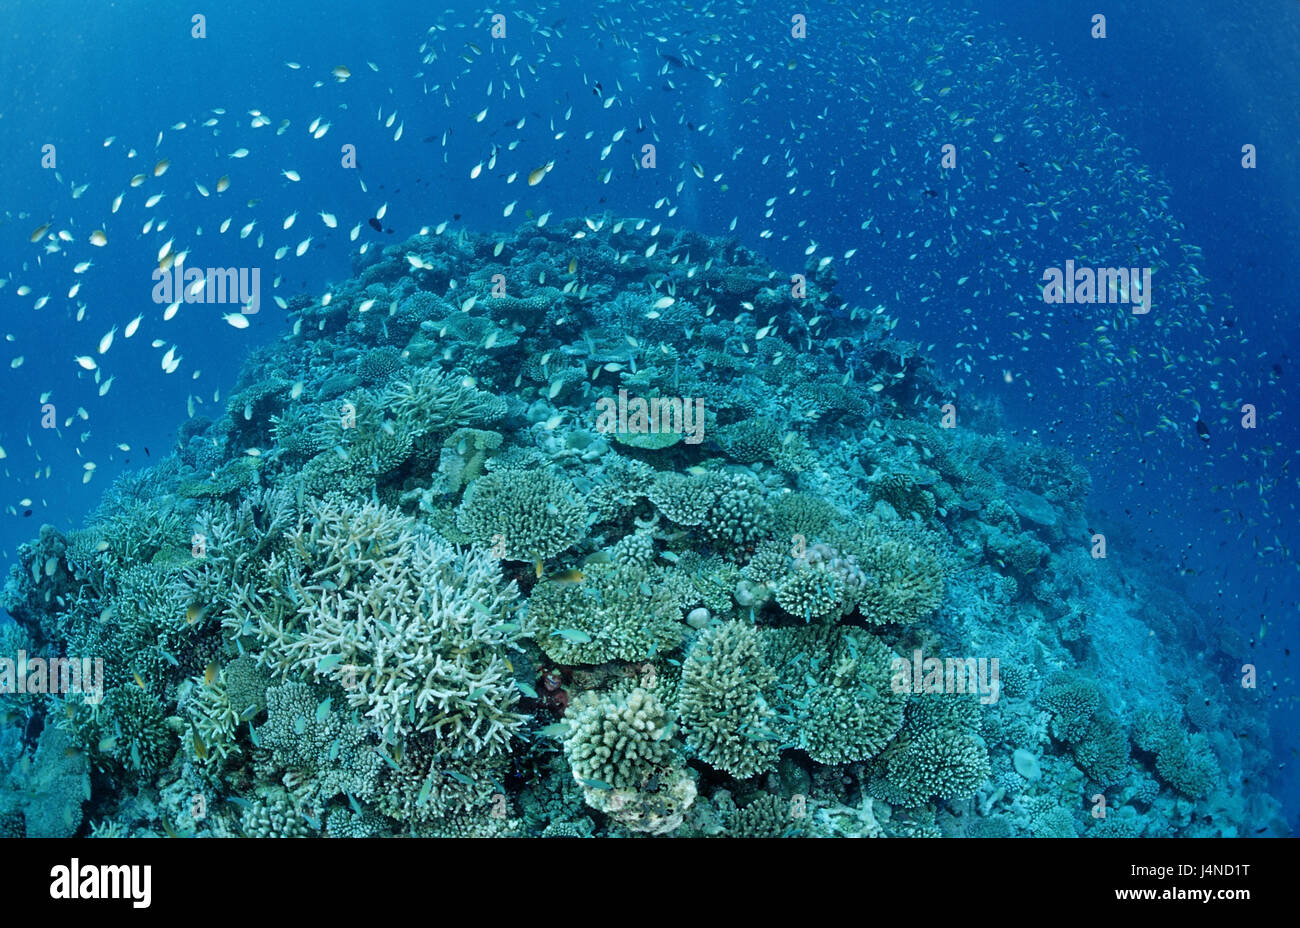 Coral reef, hard corals, fish, Stock Photo